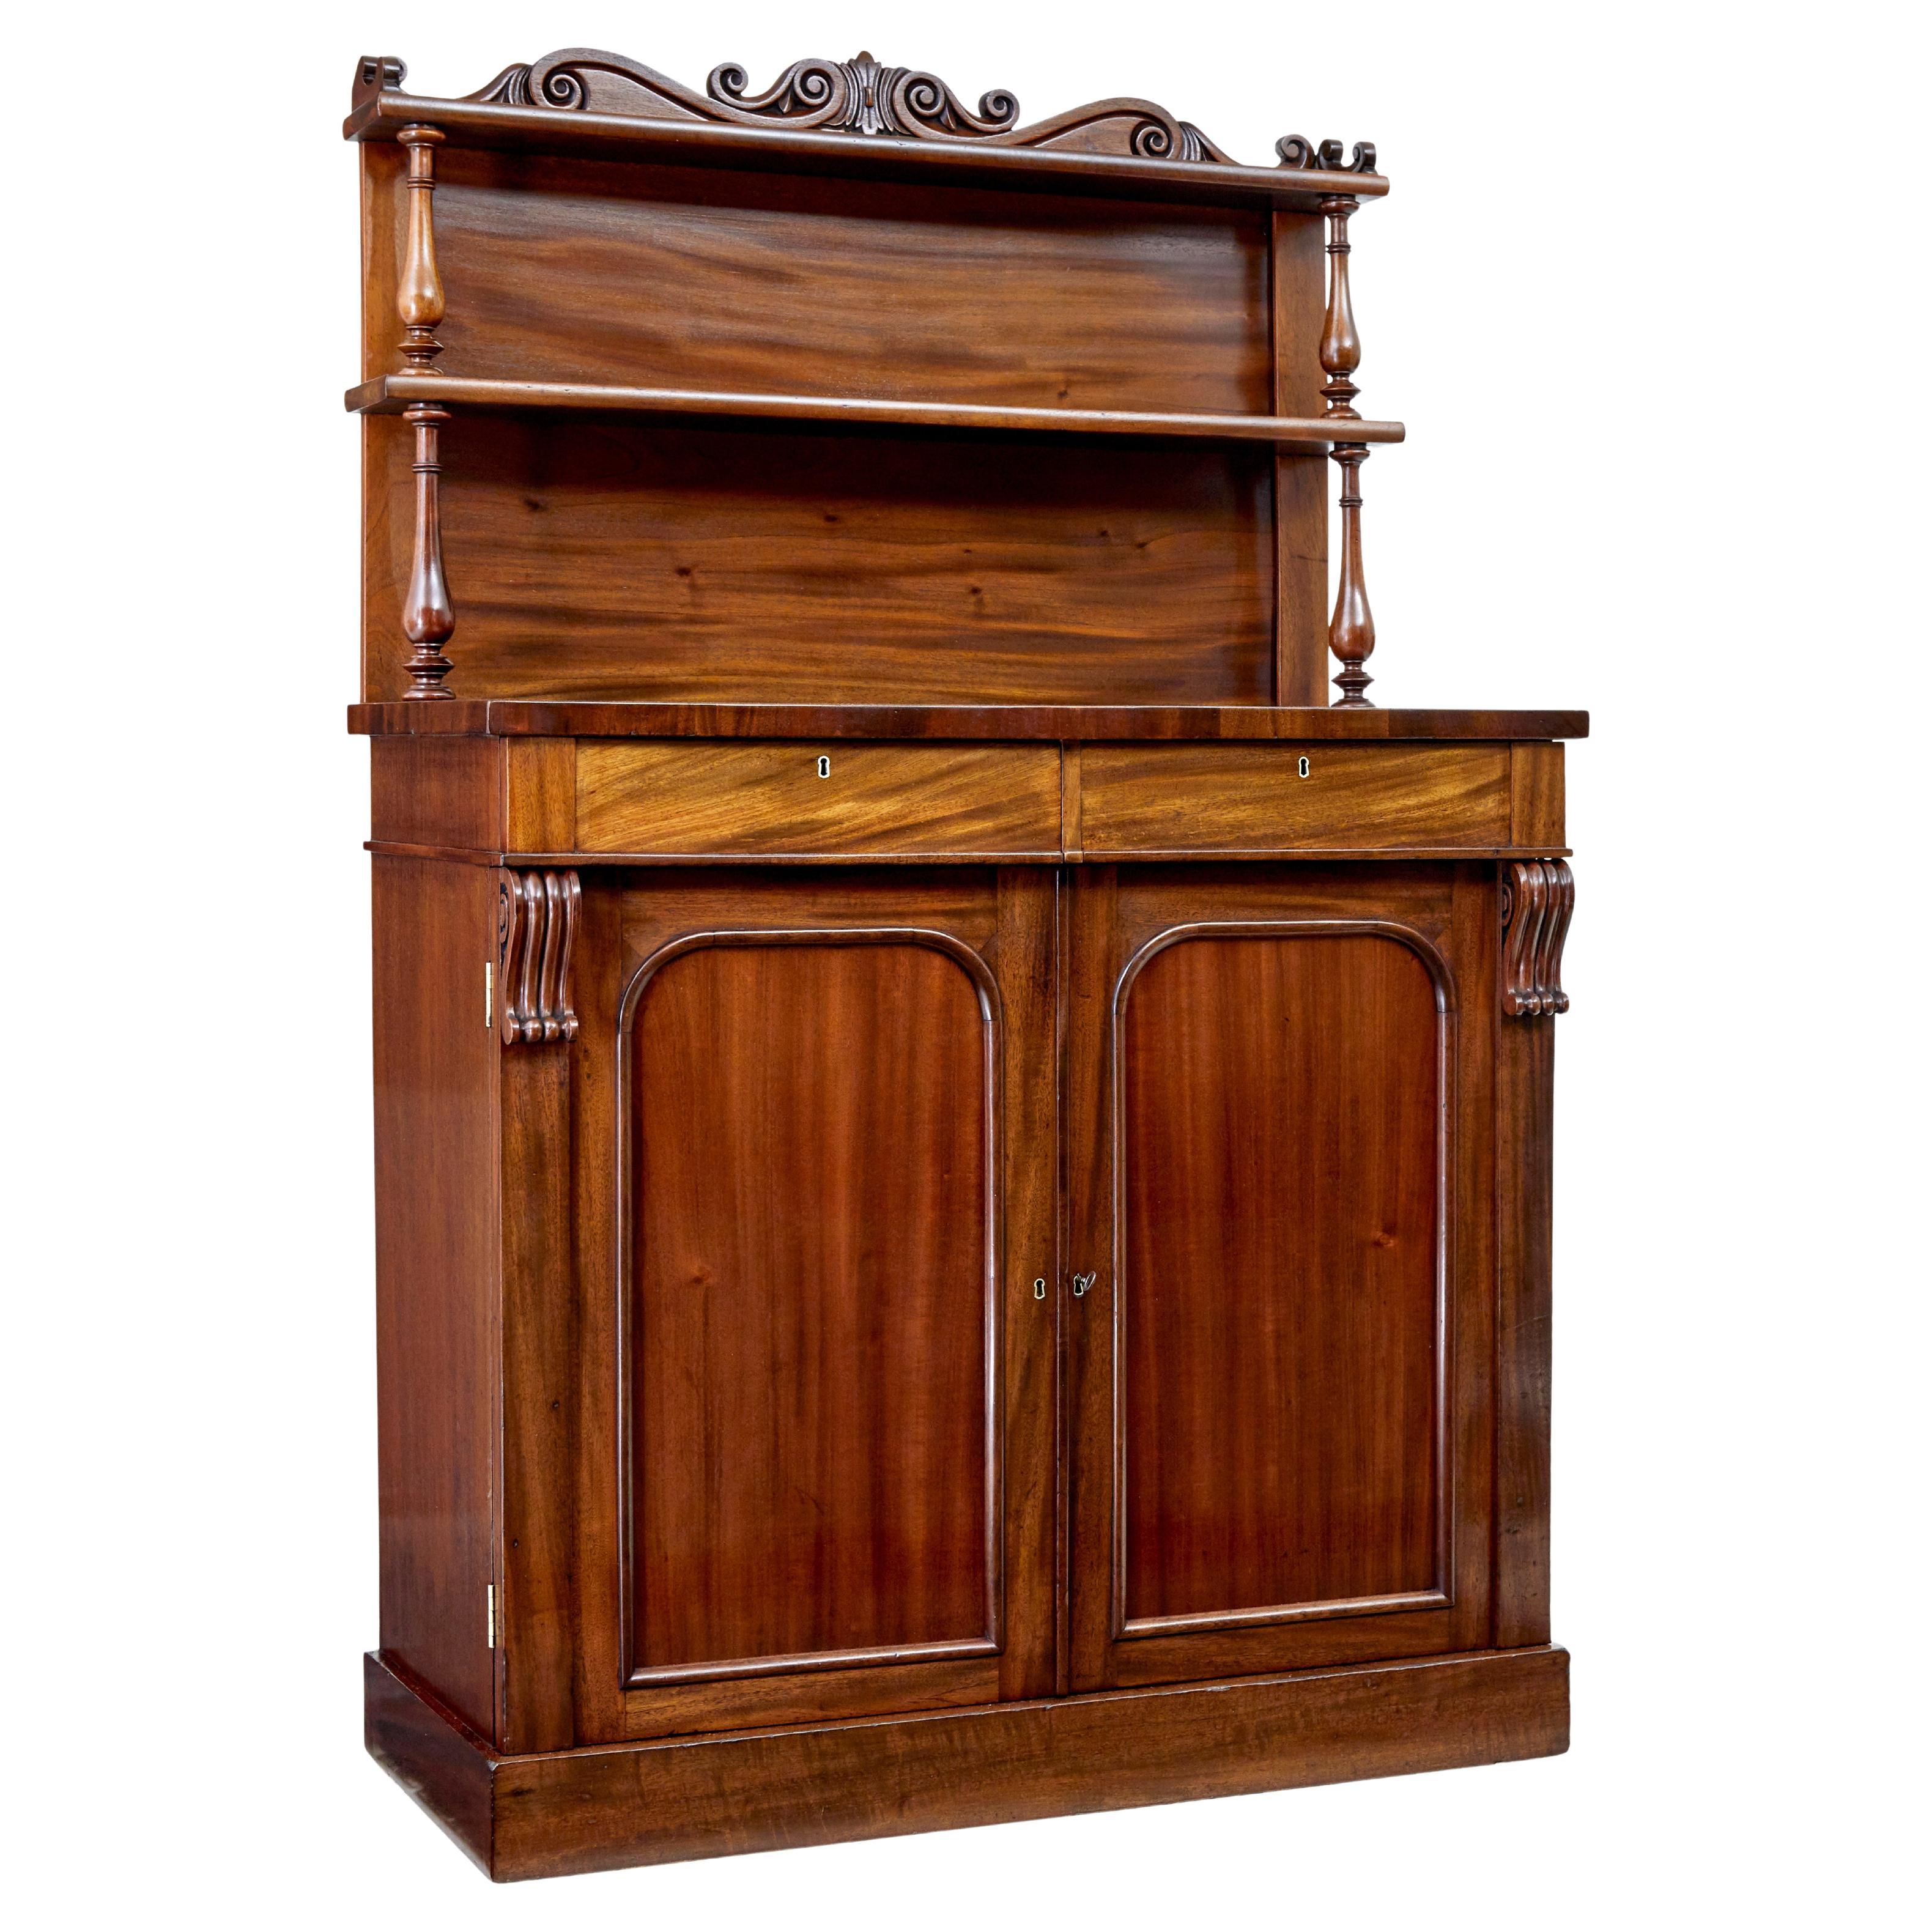 19th century French mahogany chiffonier sideboard For Sale